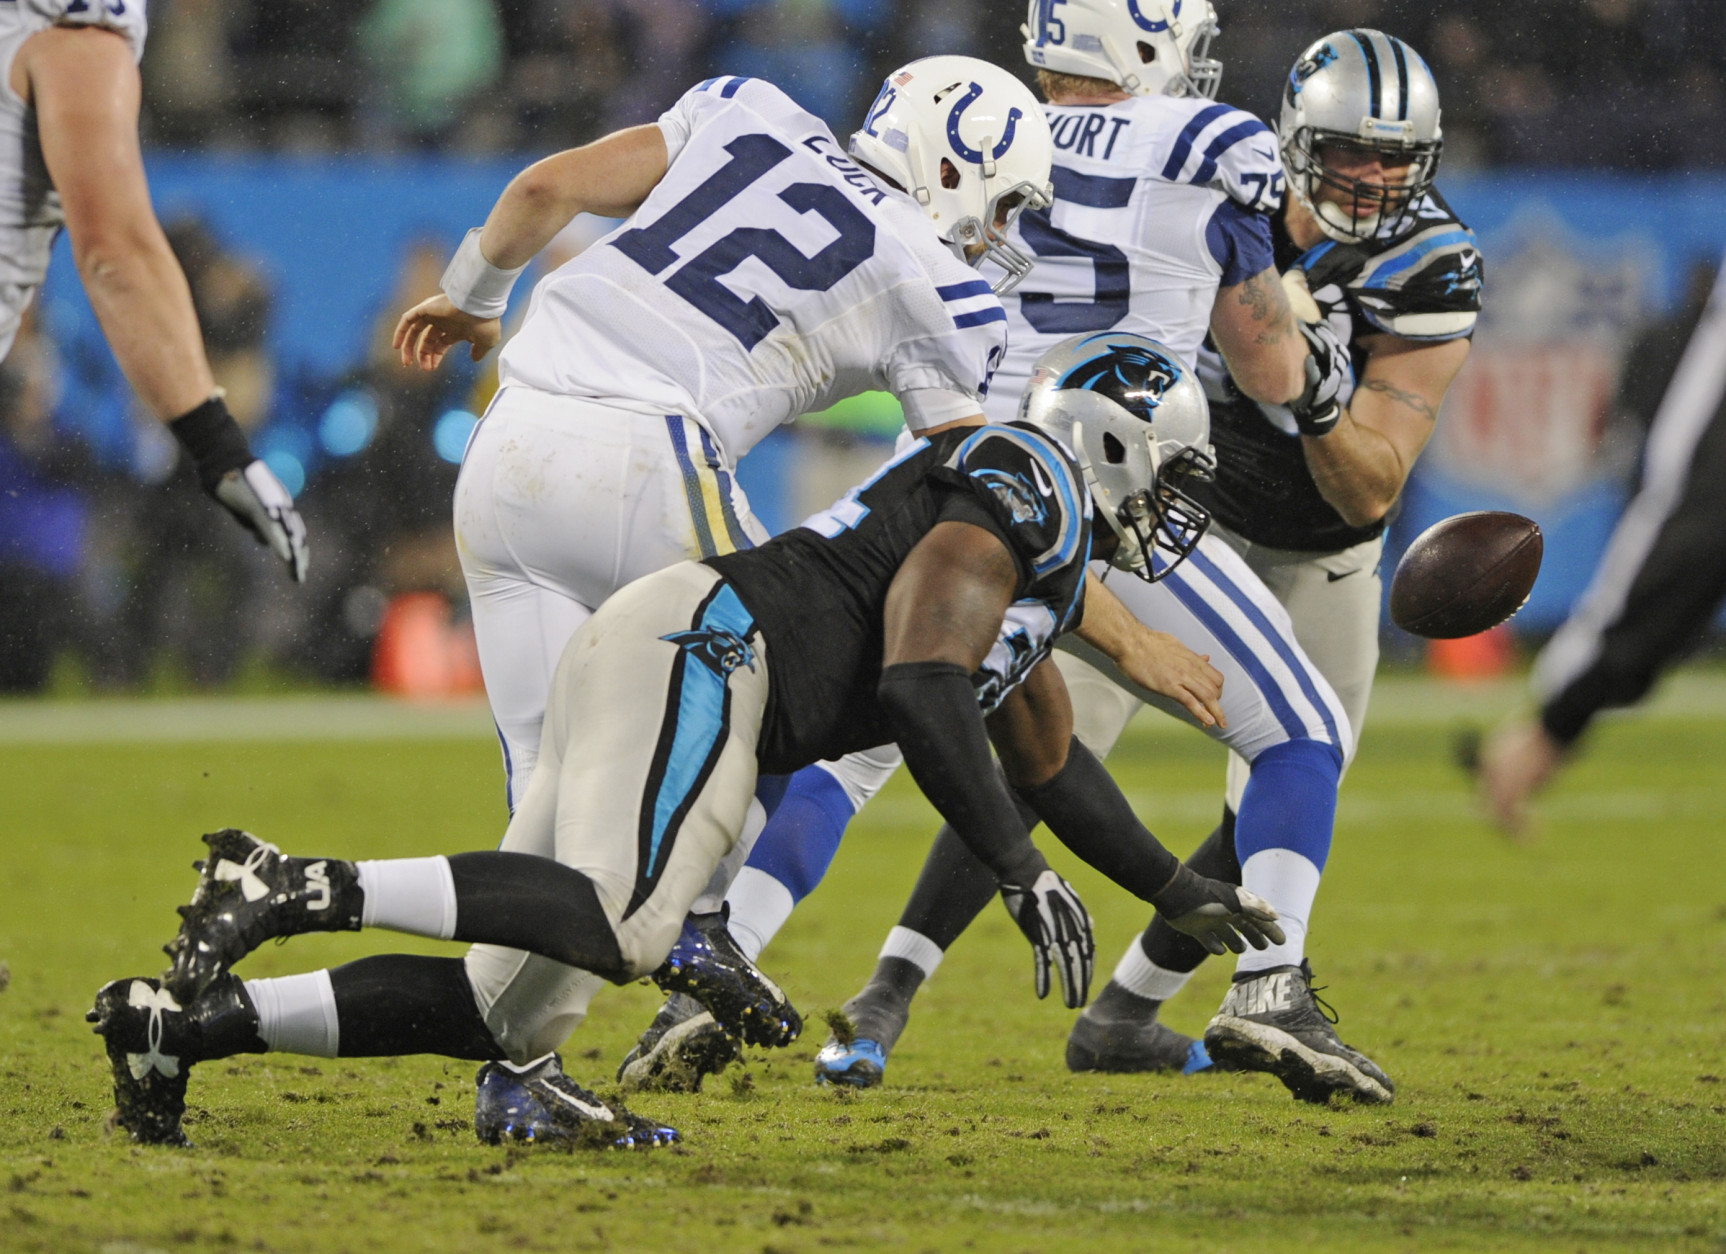 Indianapolis Colts' Andrew Luck (12) fumbles the ball after being hit by Carolina Panthers' Kony Ealy (94) in the first half of an NFL football game in Charlotte, N.C., Monday, Nov. 2, 2015. The Colts recovered the fumble. (AP Photo/Mike McCarn)